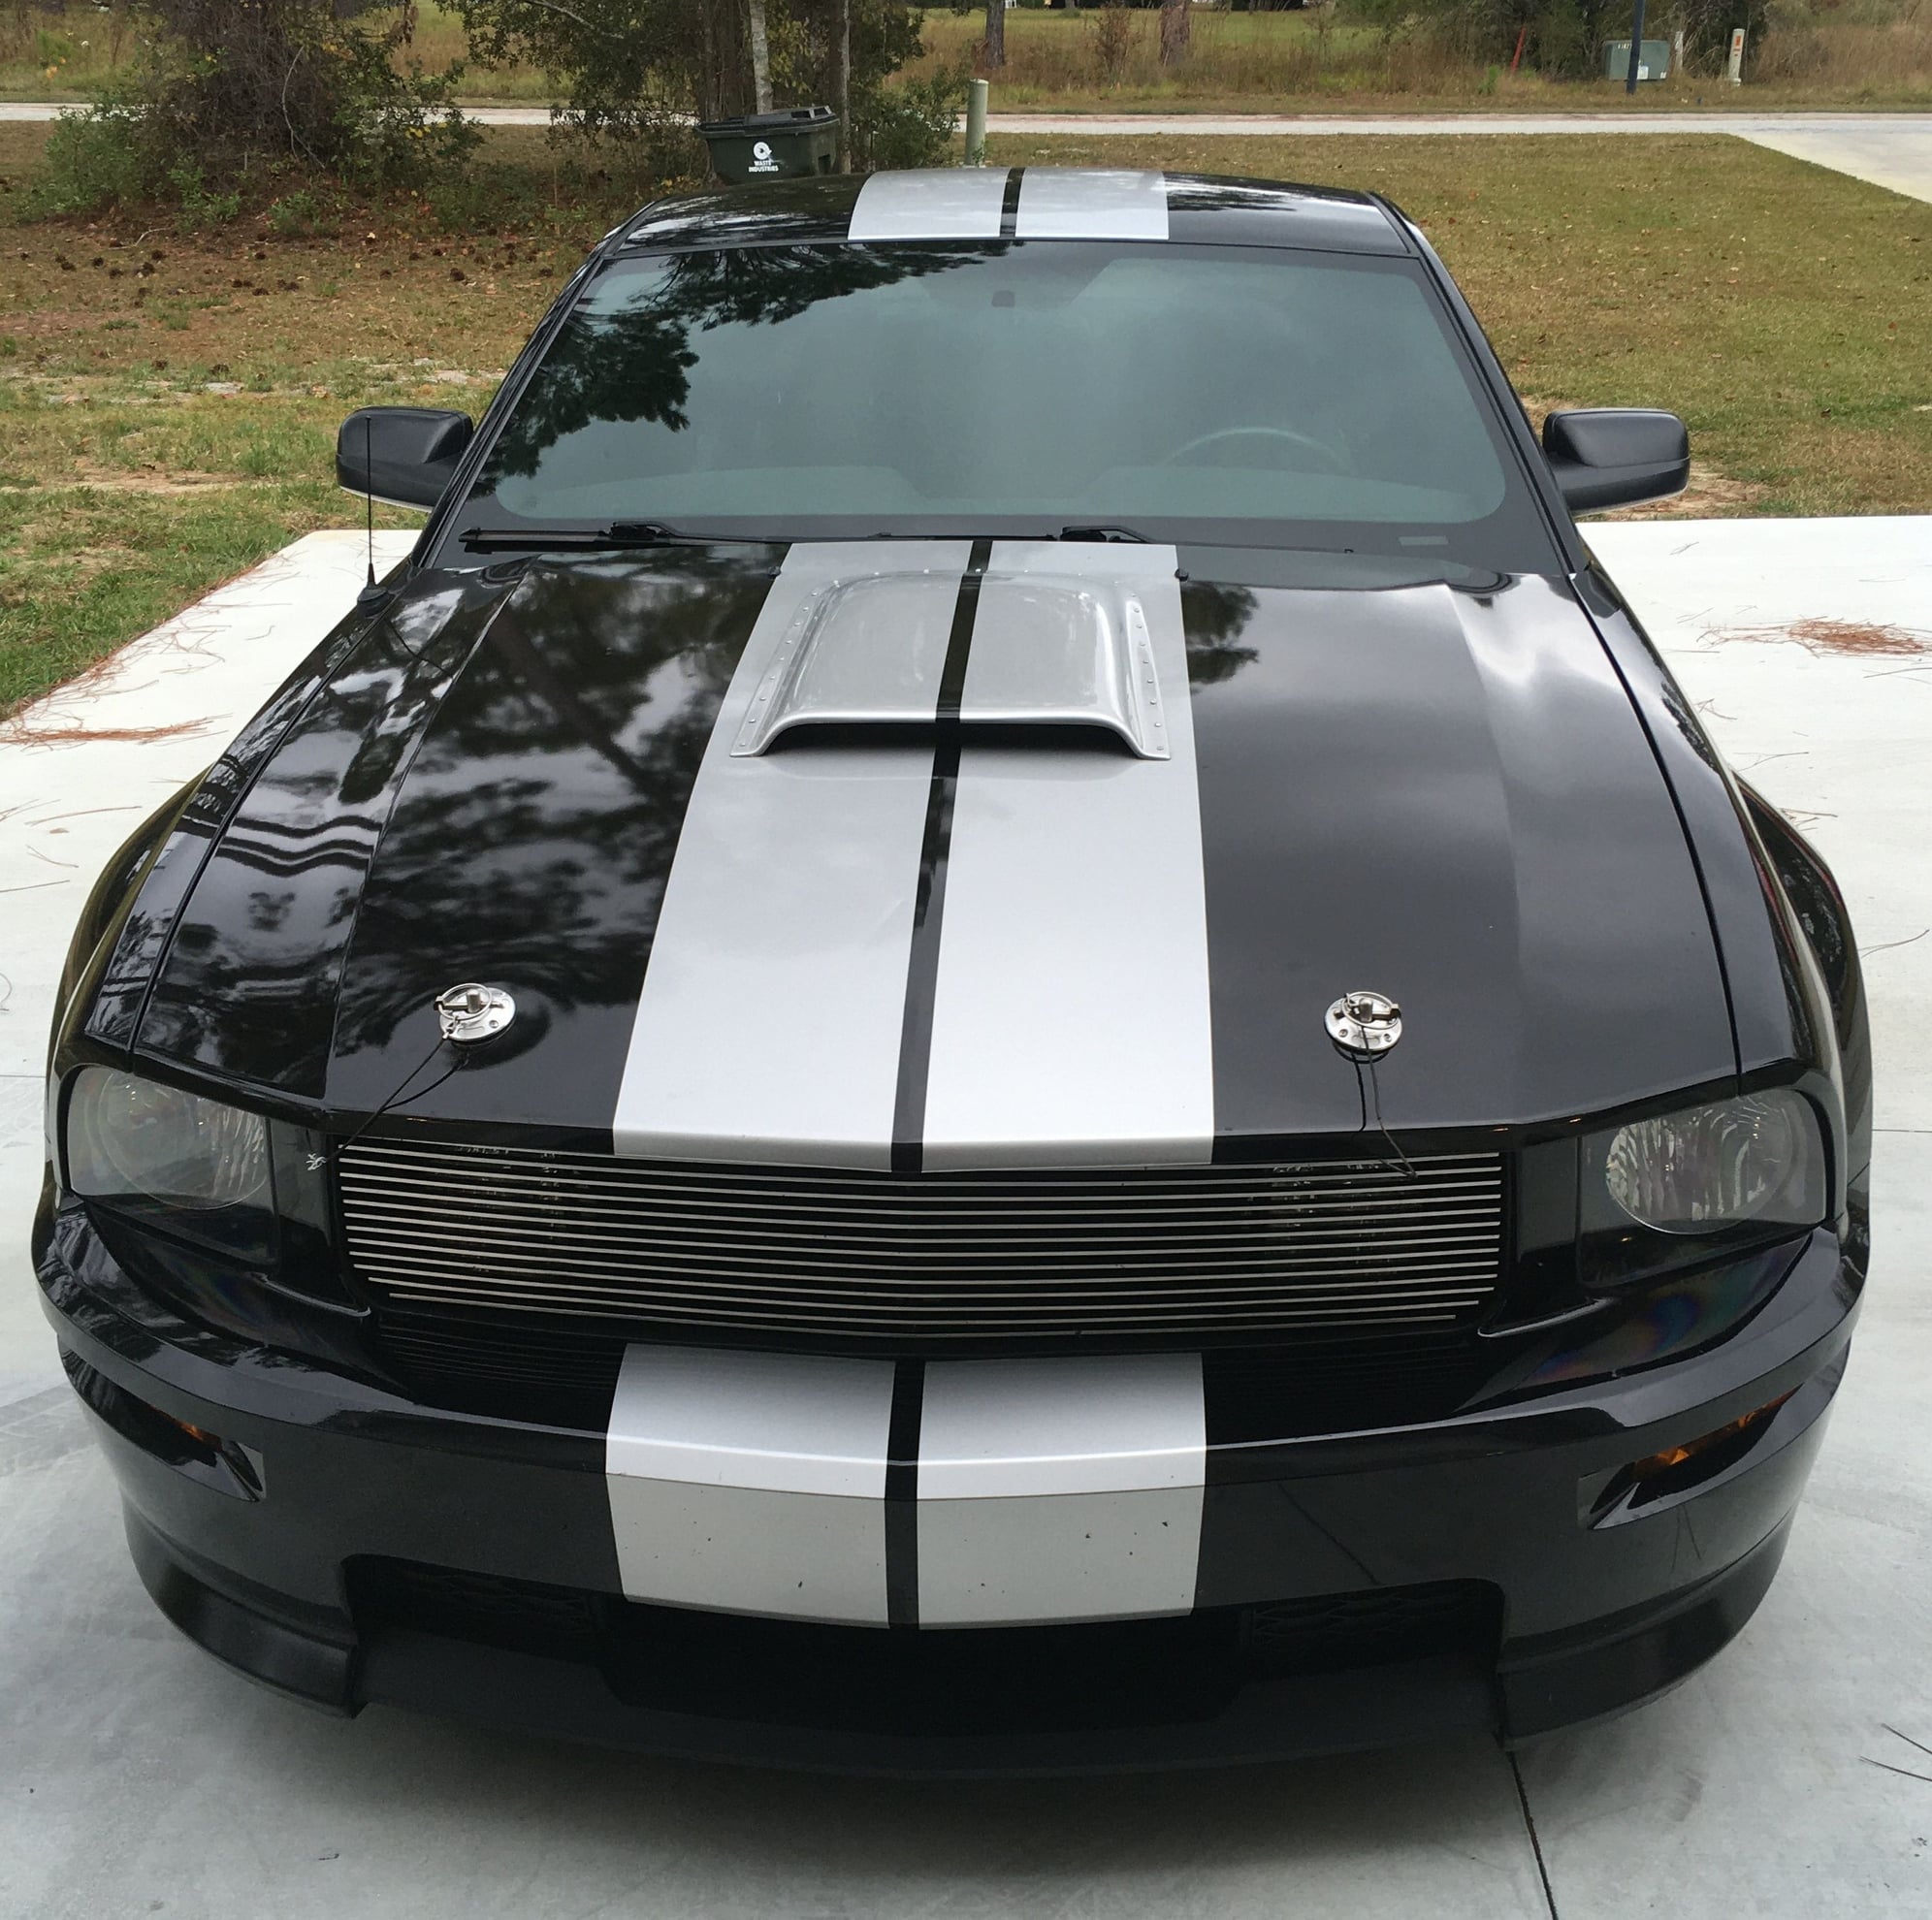 2007 Ford Mustang - Immaculate Collector quality Shelby GT ! - Used - VIN 1ZVHT82HX75336535 - 86,847 Miles - 8 cyl - 2WD - Manual - Coupe - Black - Broxton, GA 31519, United States